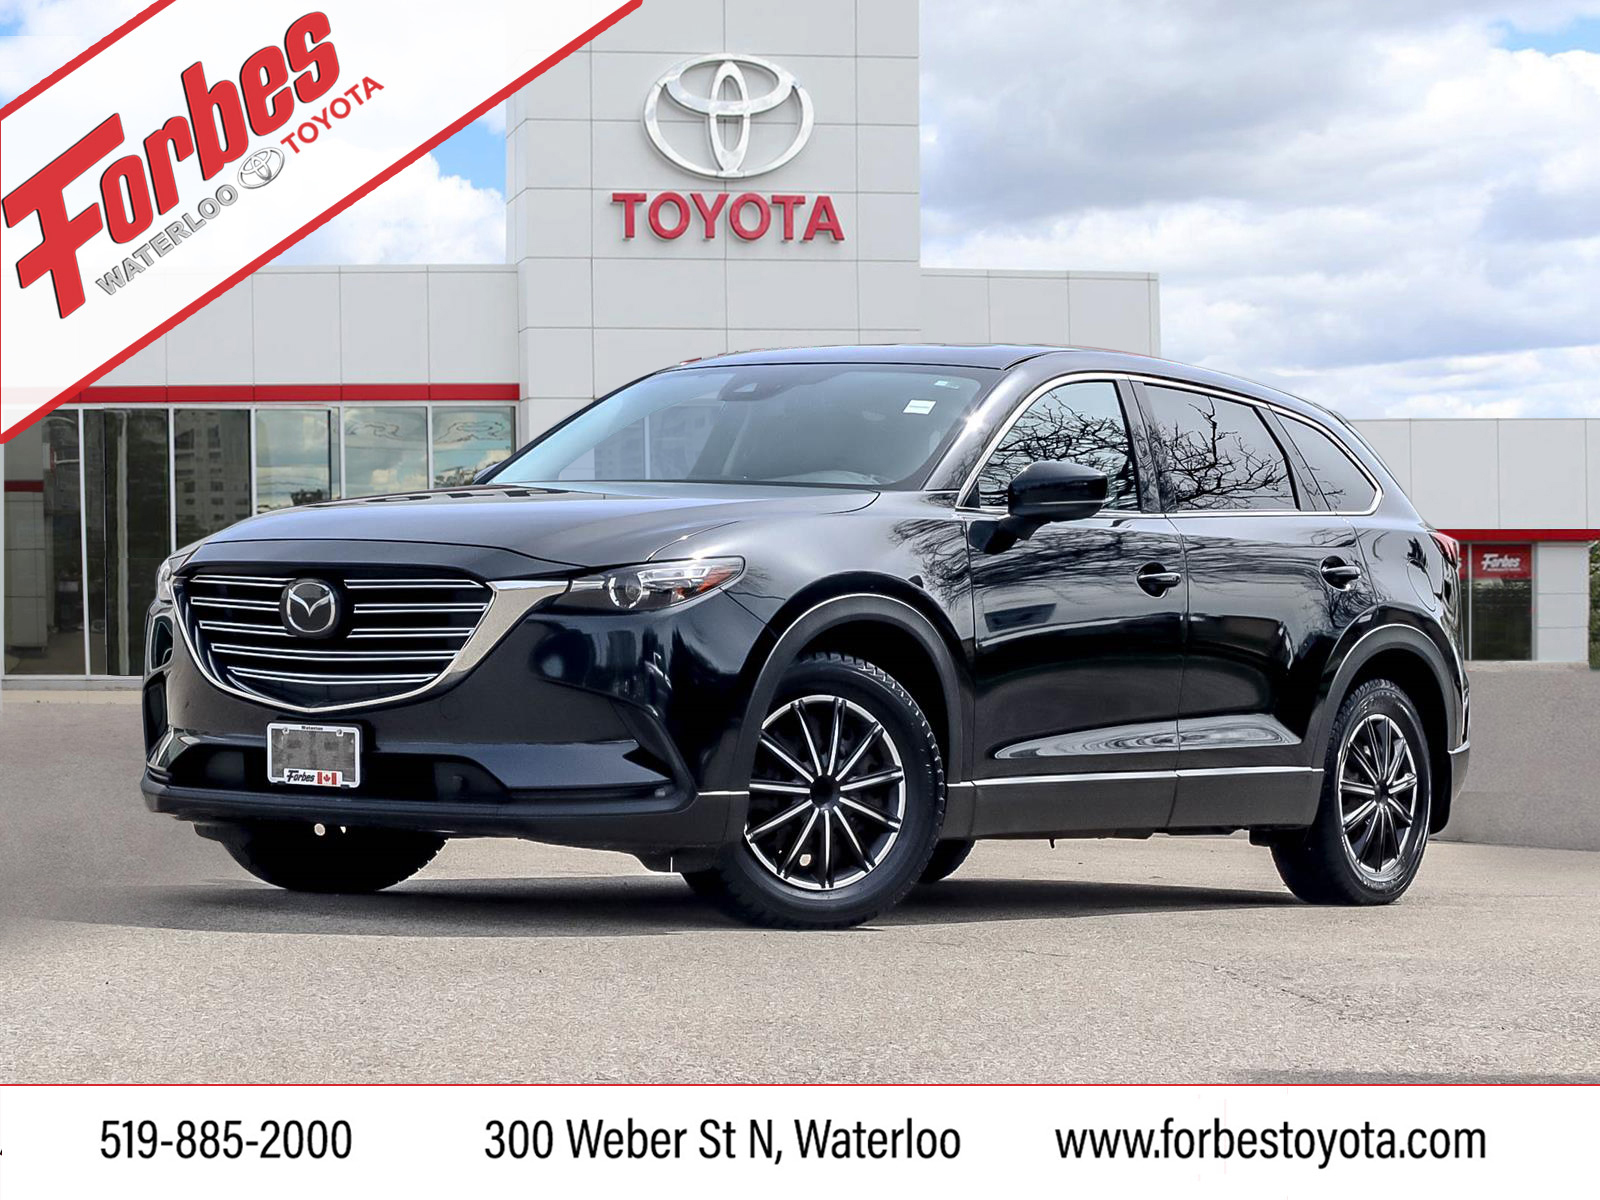 2018 Mazda CX-9 ONE OWNER GS-L LEATHER/ROOF WITH WINTERS